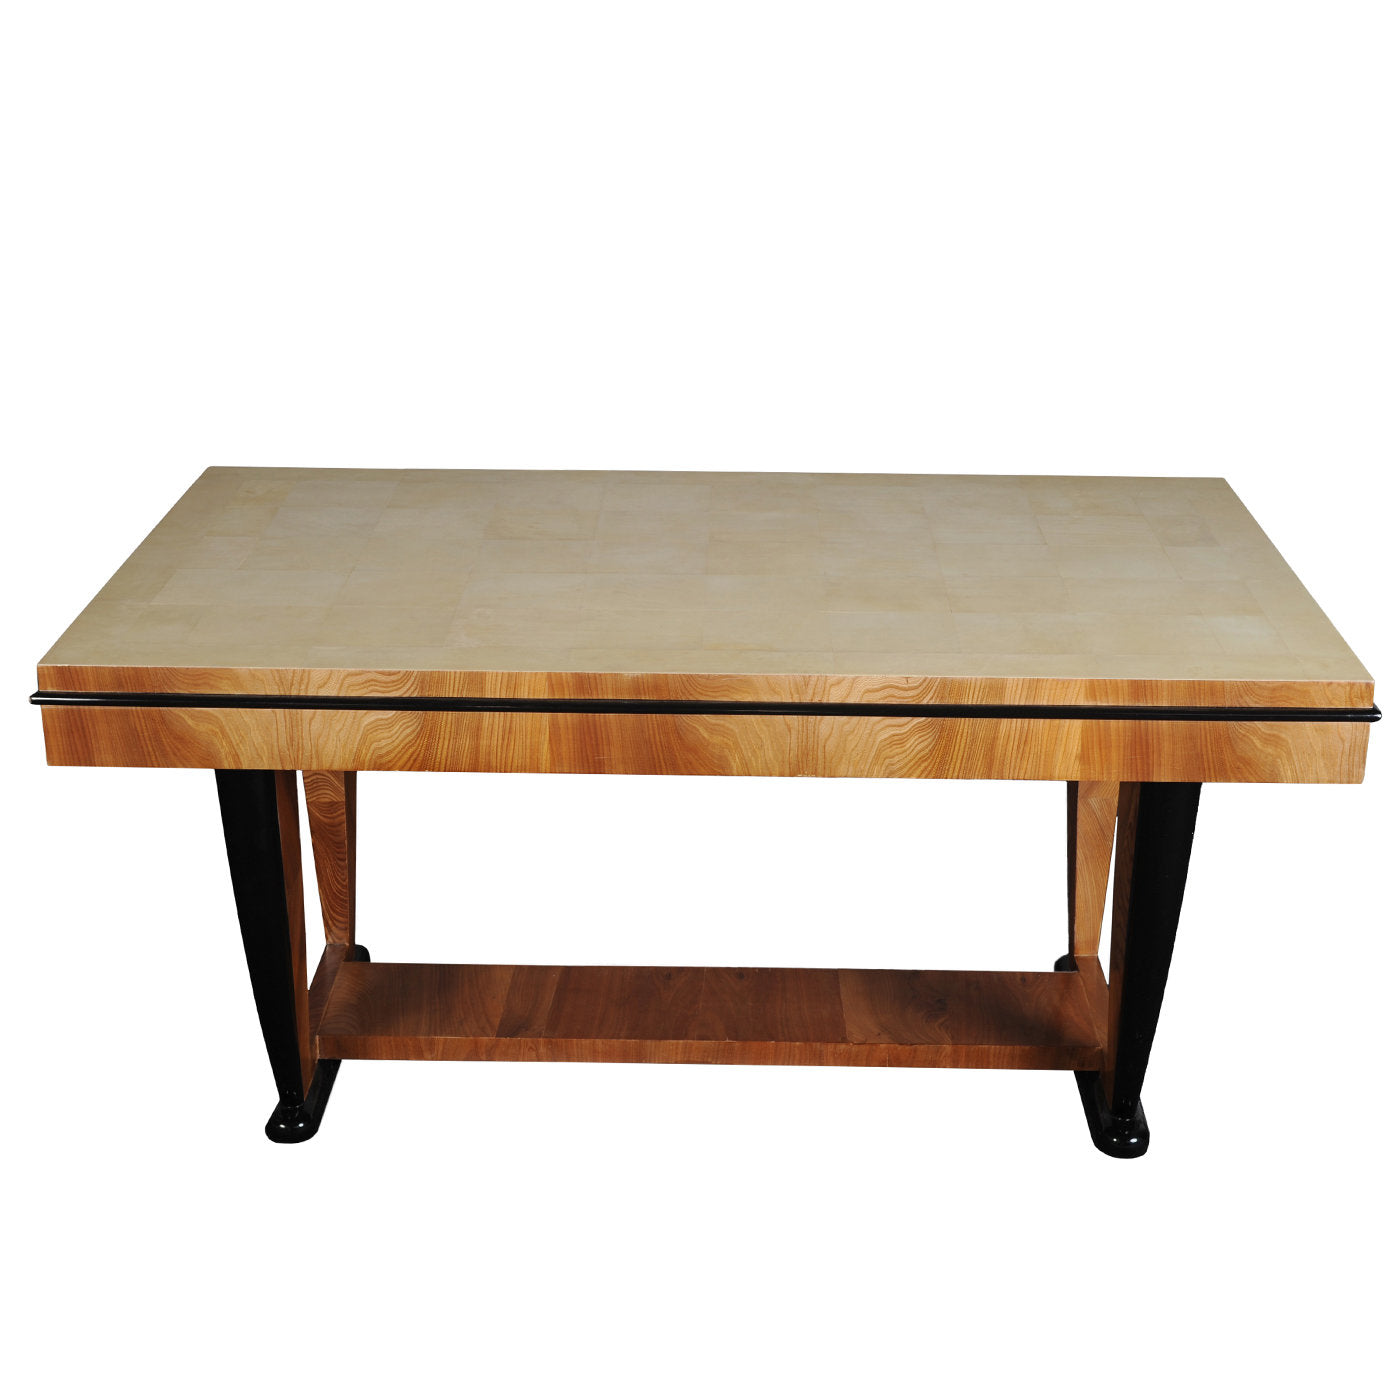 PLM-0001 Ivory Parchment Dining Table - Alternative view 1